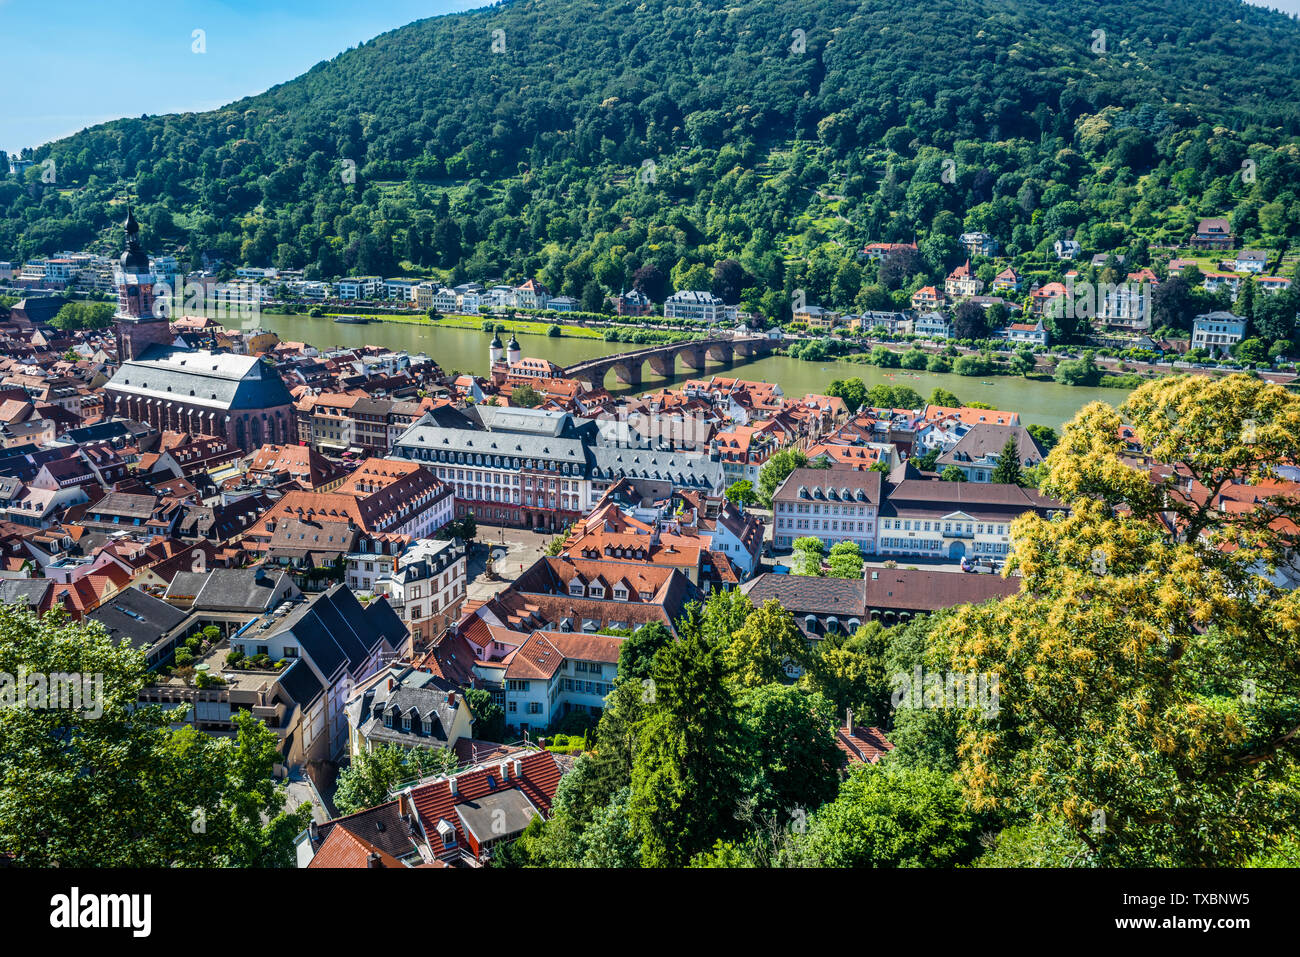 panoramic view of the the city of Heidelberg with Neckar river and the Old Bridge, Heidelberg, Baden-Württemberg; Germany Stock Photo